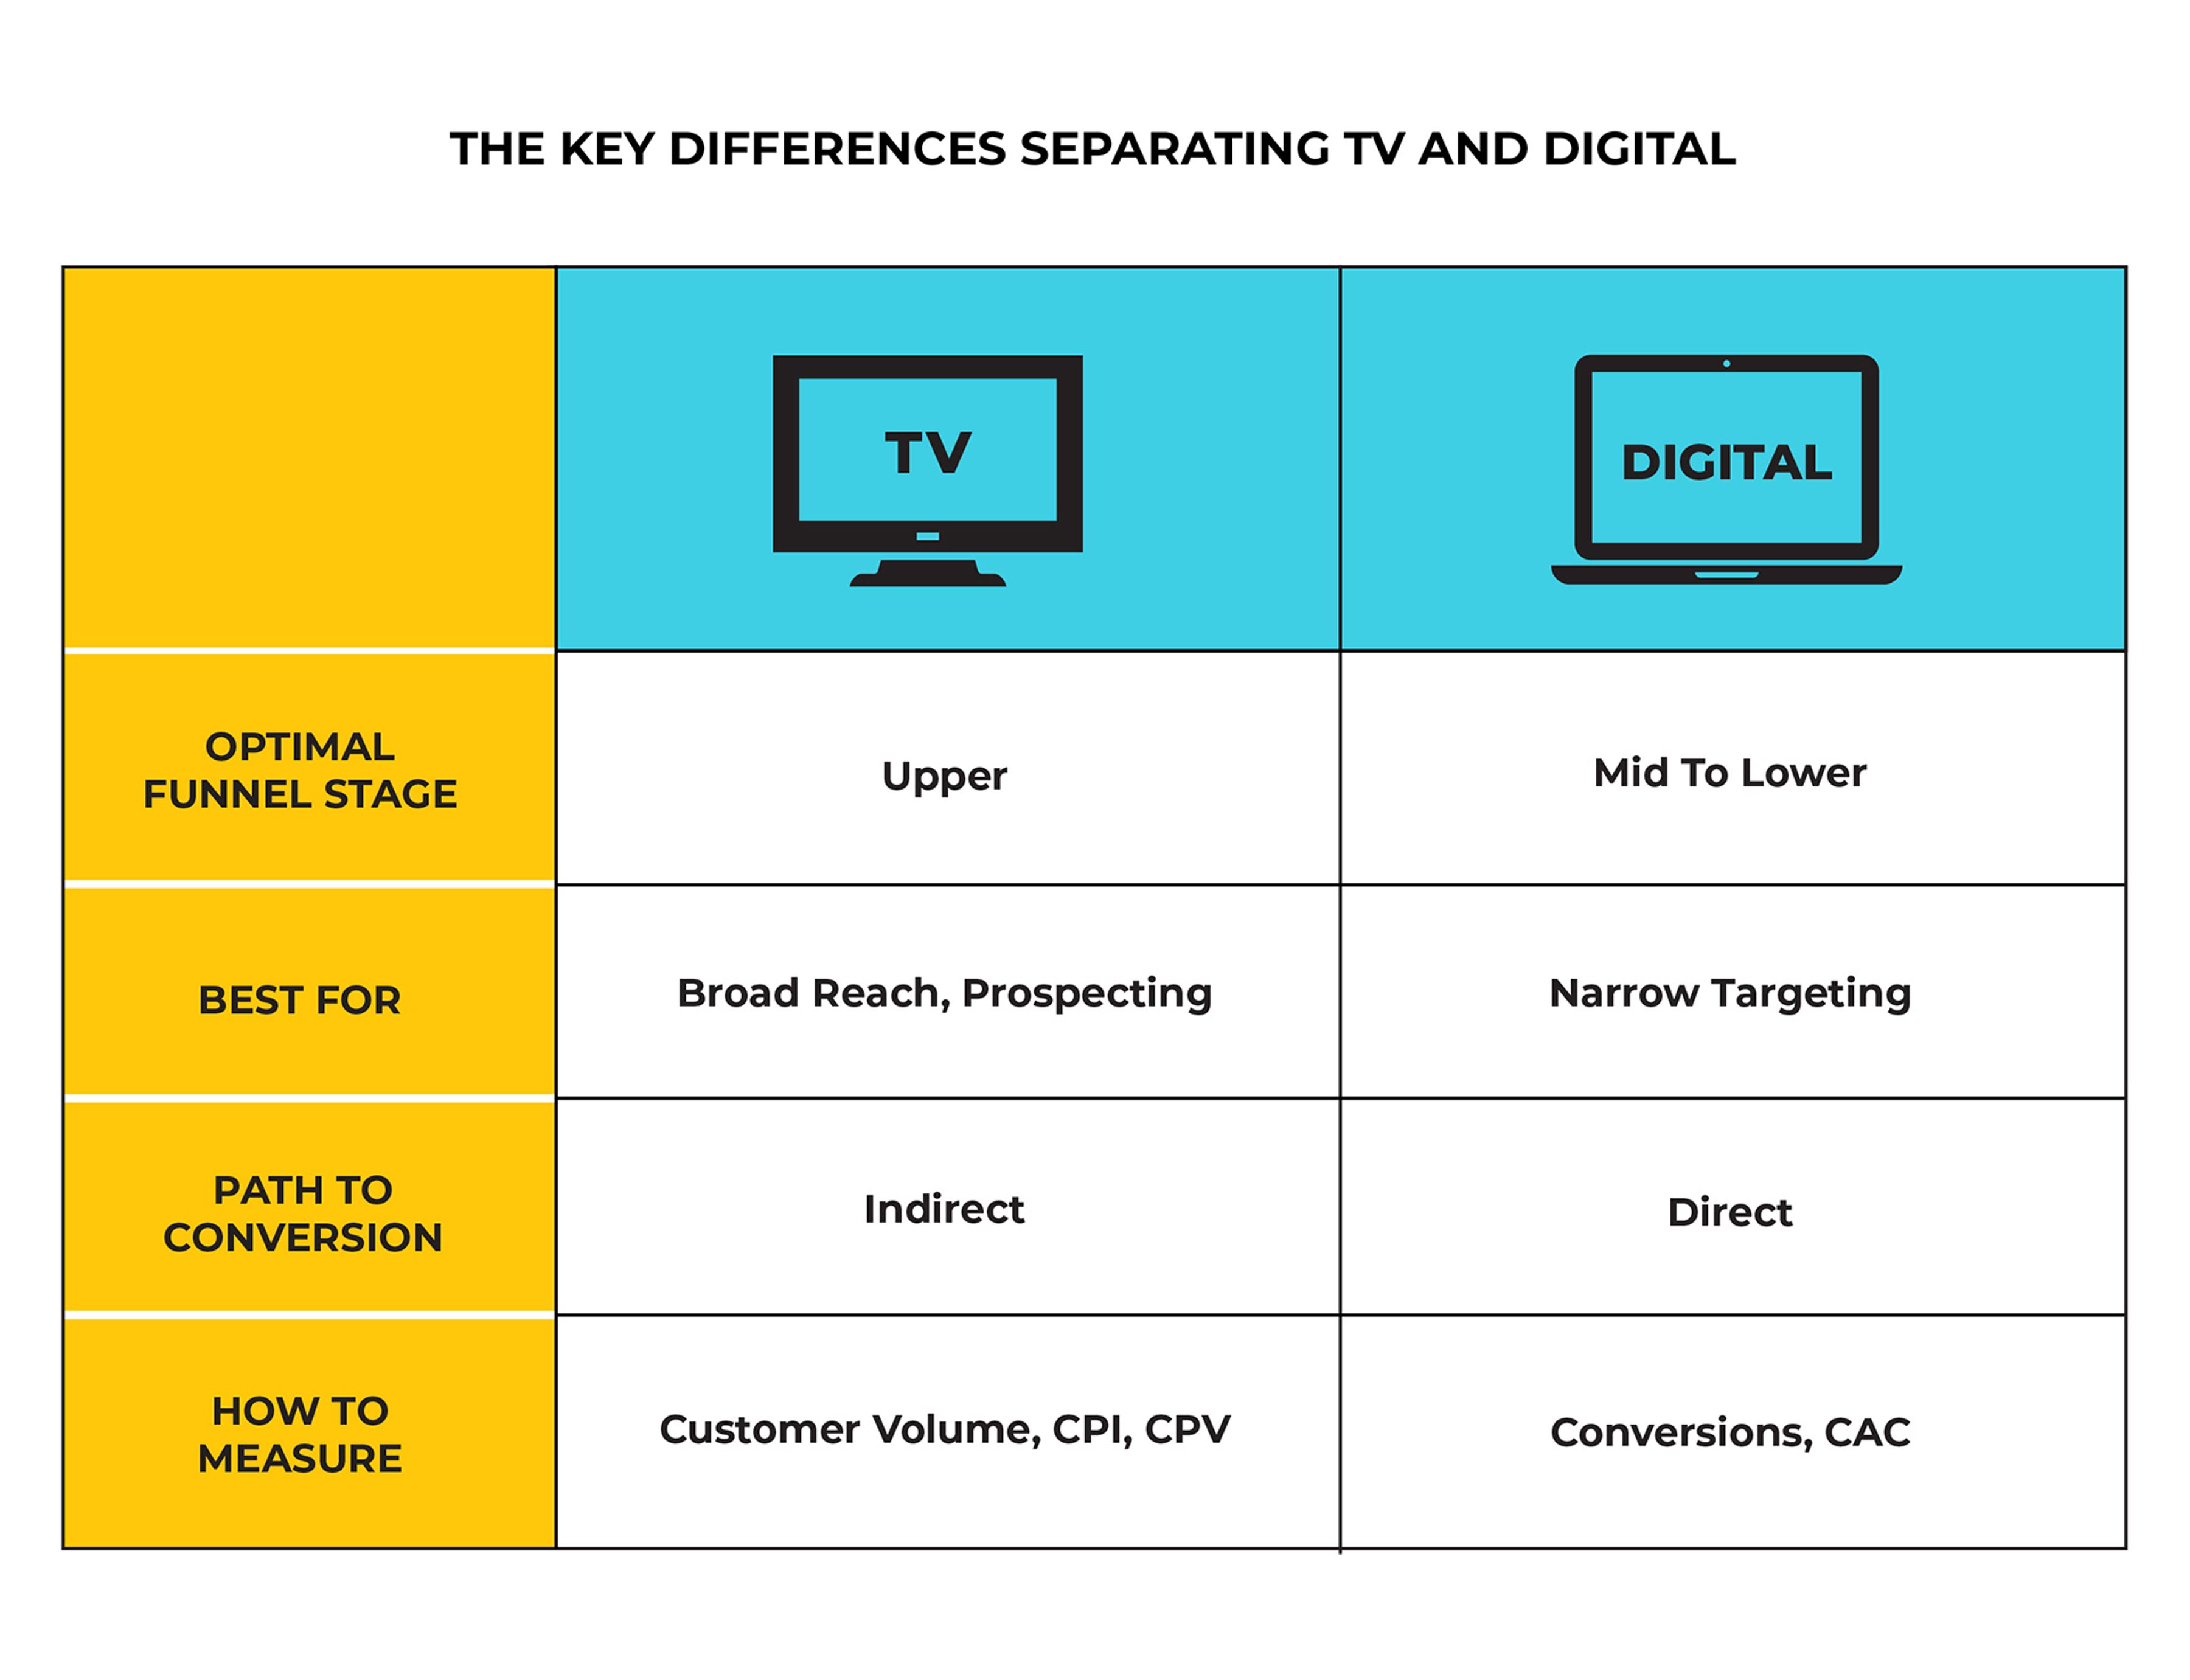 Table showing the key differences separating TV and digital in terms of optimal funnel stage, what it's best for, path to conversion, and how to measure.